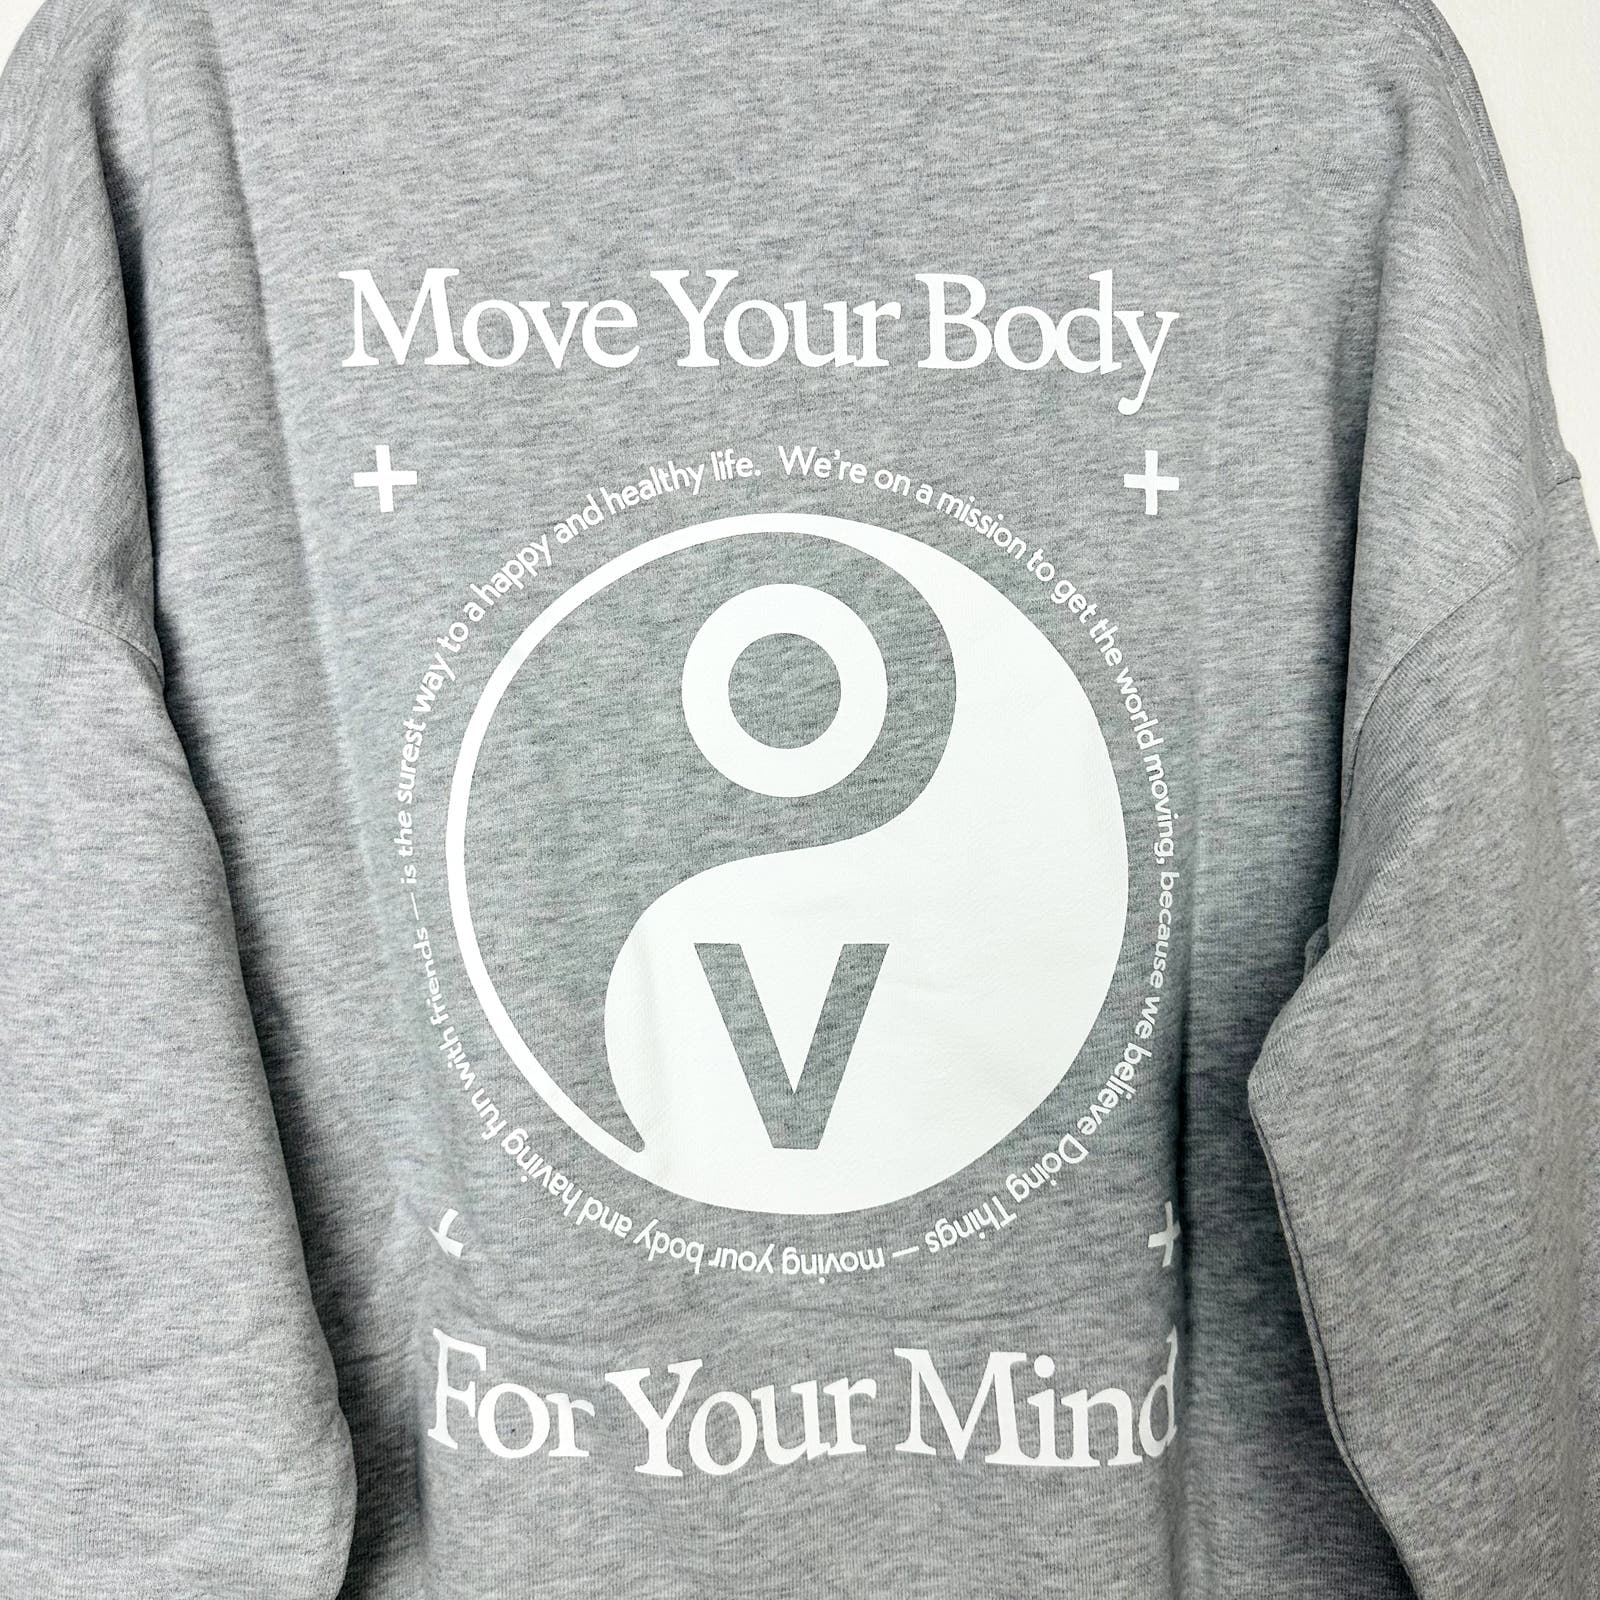 Outdoor Voices NWT OV Graphic Sweatshirt Move Your Body For Your Mind Heather Grey Size Small